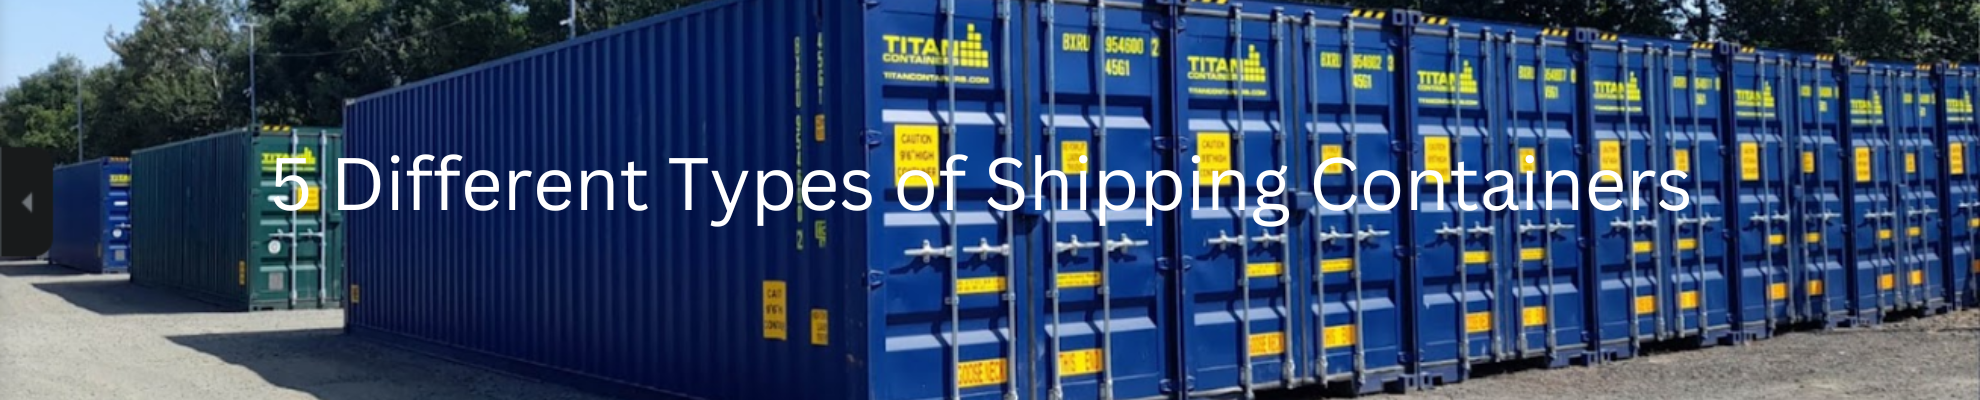 5 Different Types of Shipping Containers | Riseonic Shipping Lines